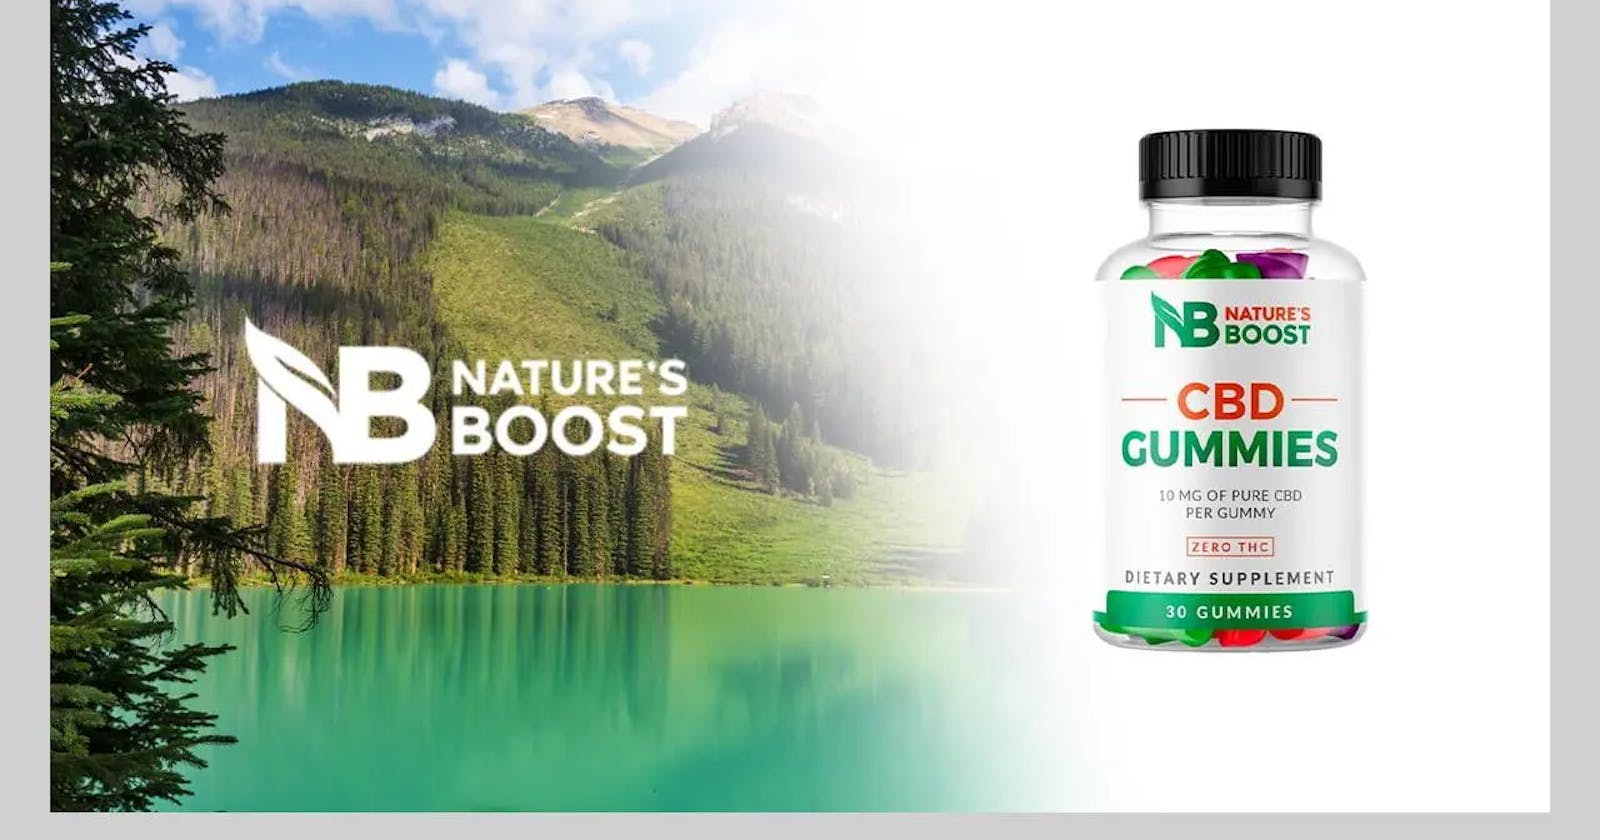 Natures Boost CBD Gummies customer service (Be Aware) Read Before Buy 2023!